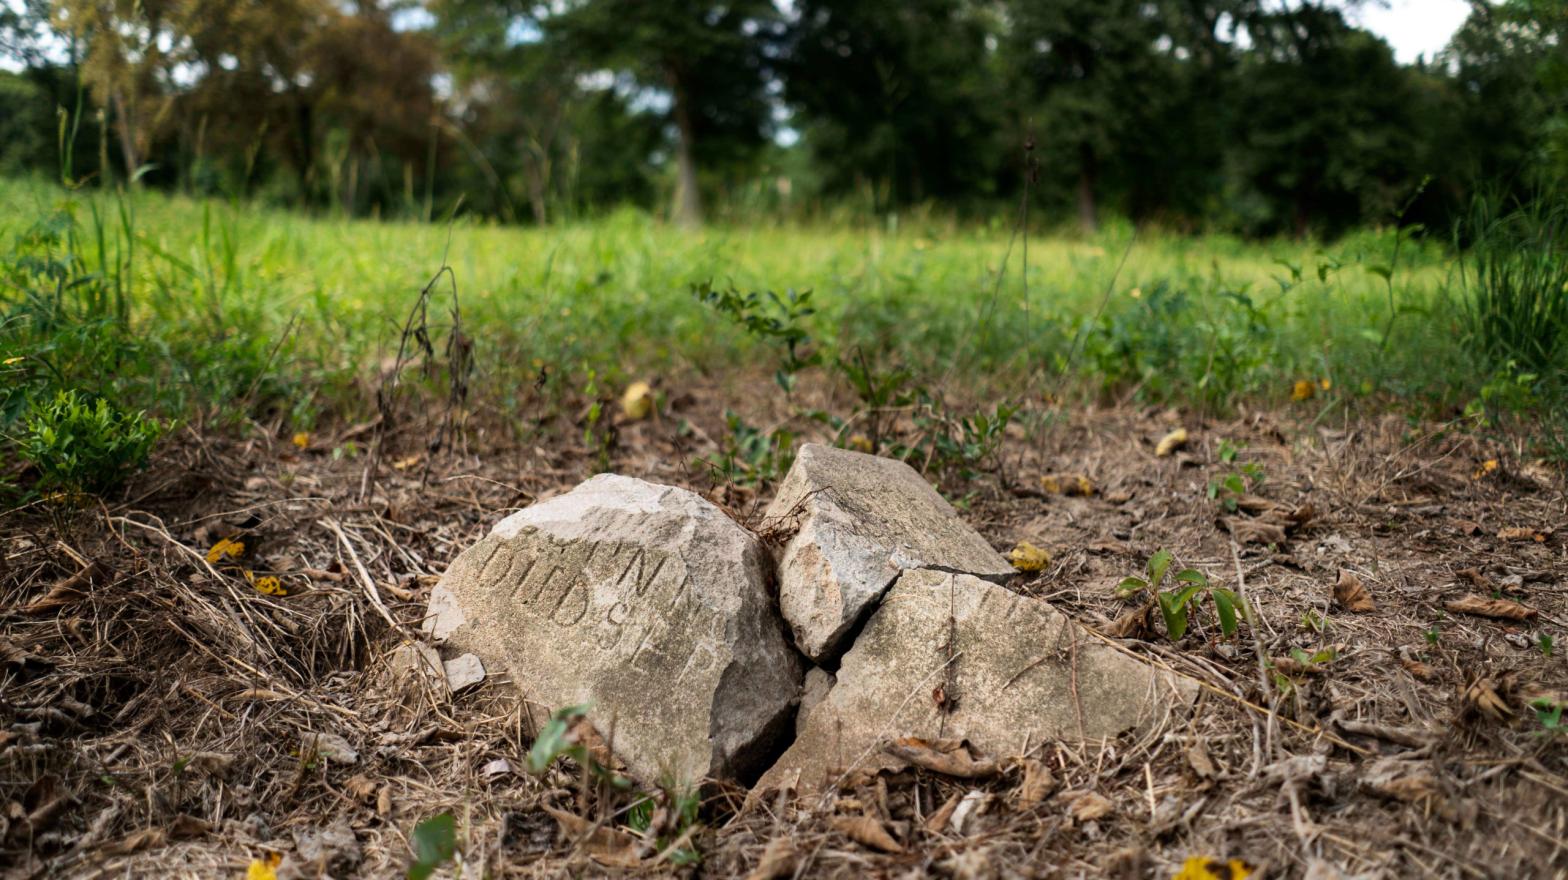 A broken gravestone lies in pieces in a slave graveyard on the Prairie View A&M University campus, a public historically black university, in Prairie View, Texas. (Photo: Melina Mara/The Washington Post via Getty Images, Getty Images)